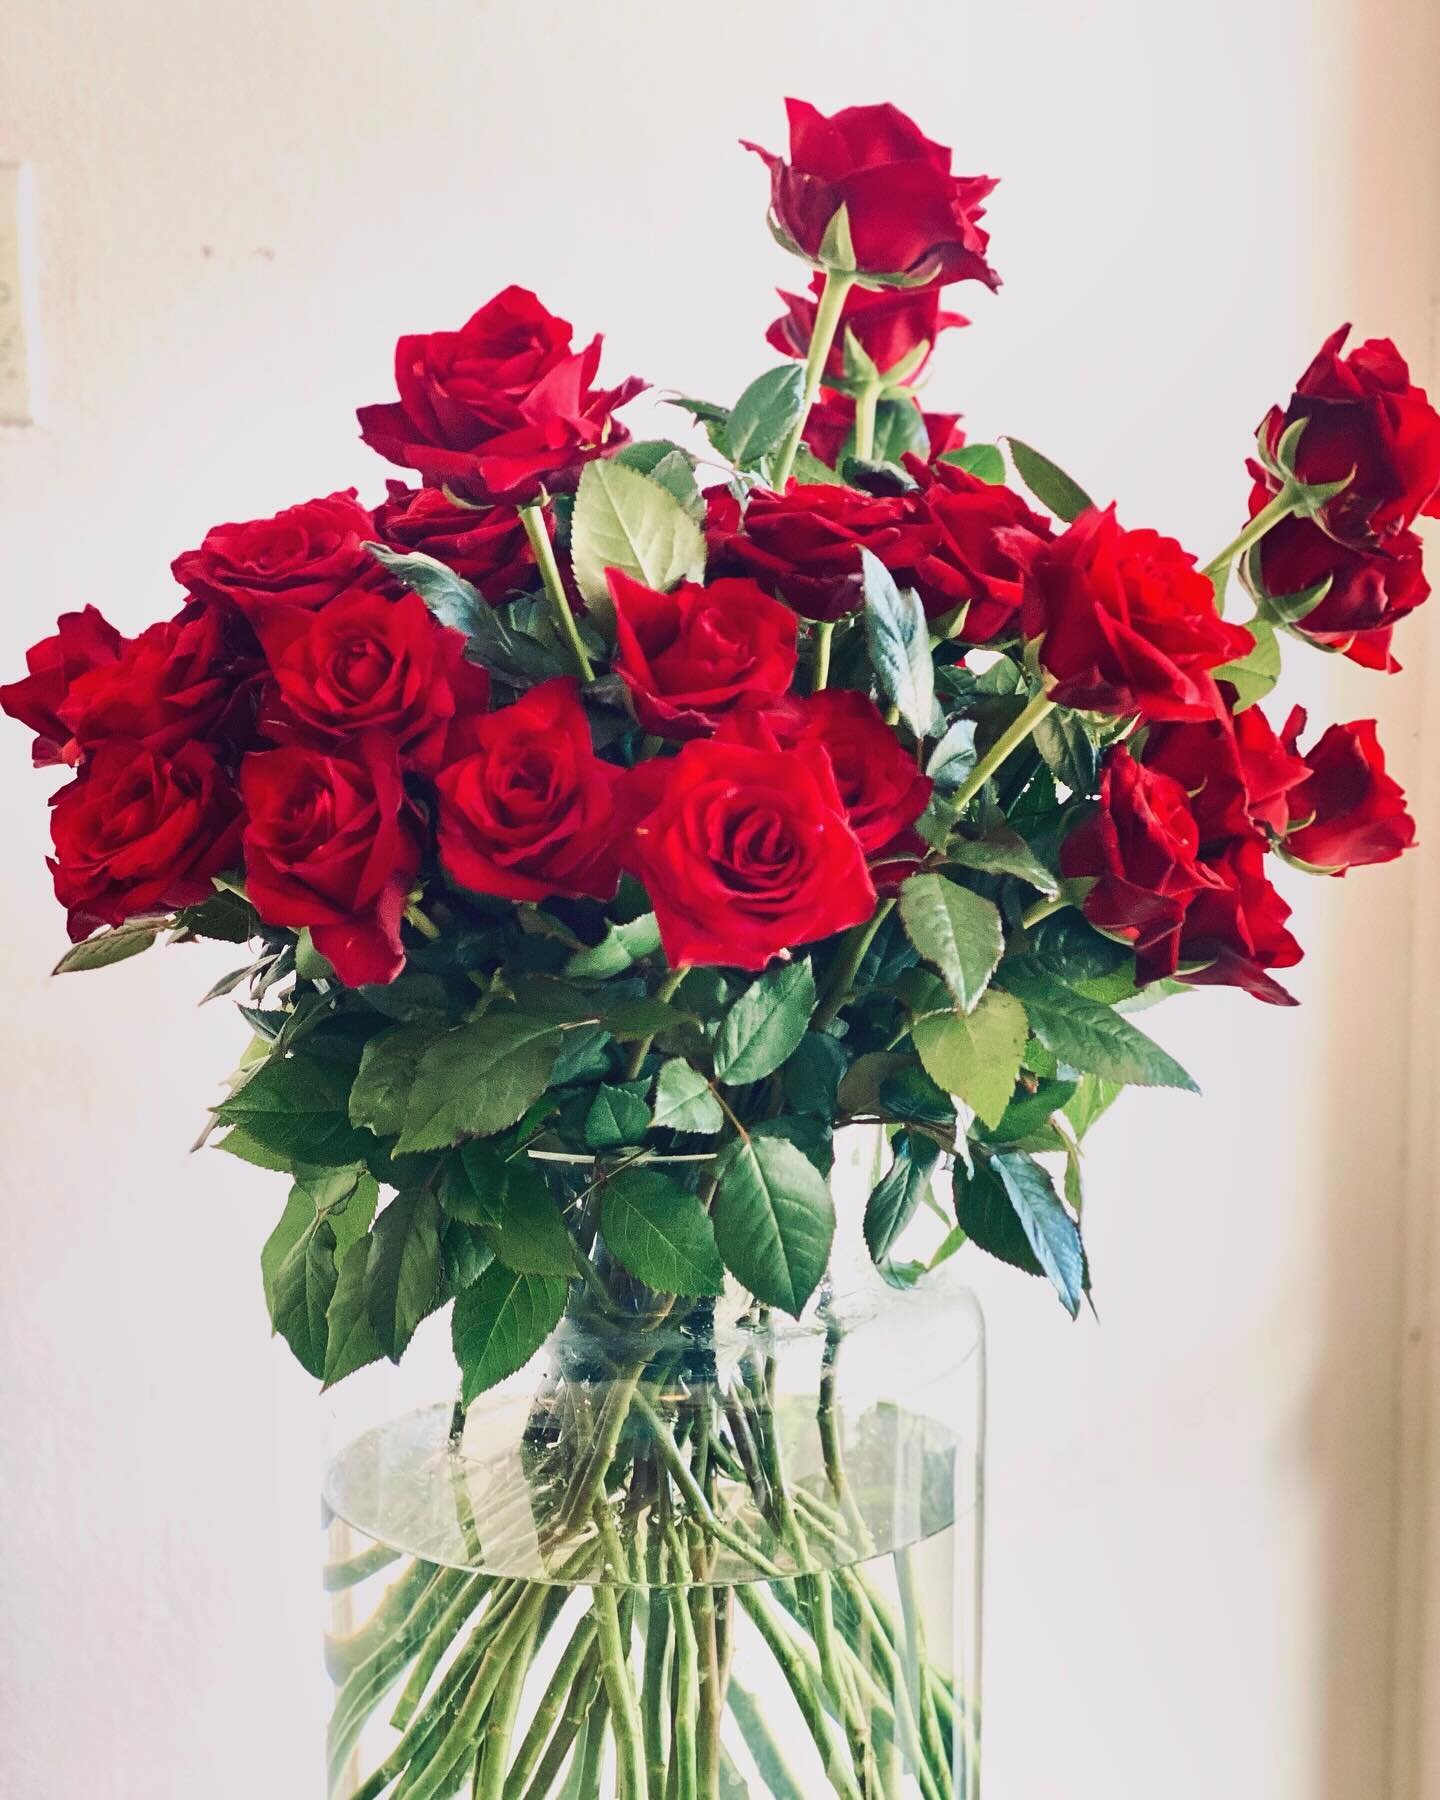 VAL DAY offerings for 2024 ❤️
Link in bio or click on image above.
Wed 14th Feb 🏹
🌹 

~
#magicforvalentines #valentinesday #2024 #roses #florist #lovers #love #engagement #cupid 🏹